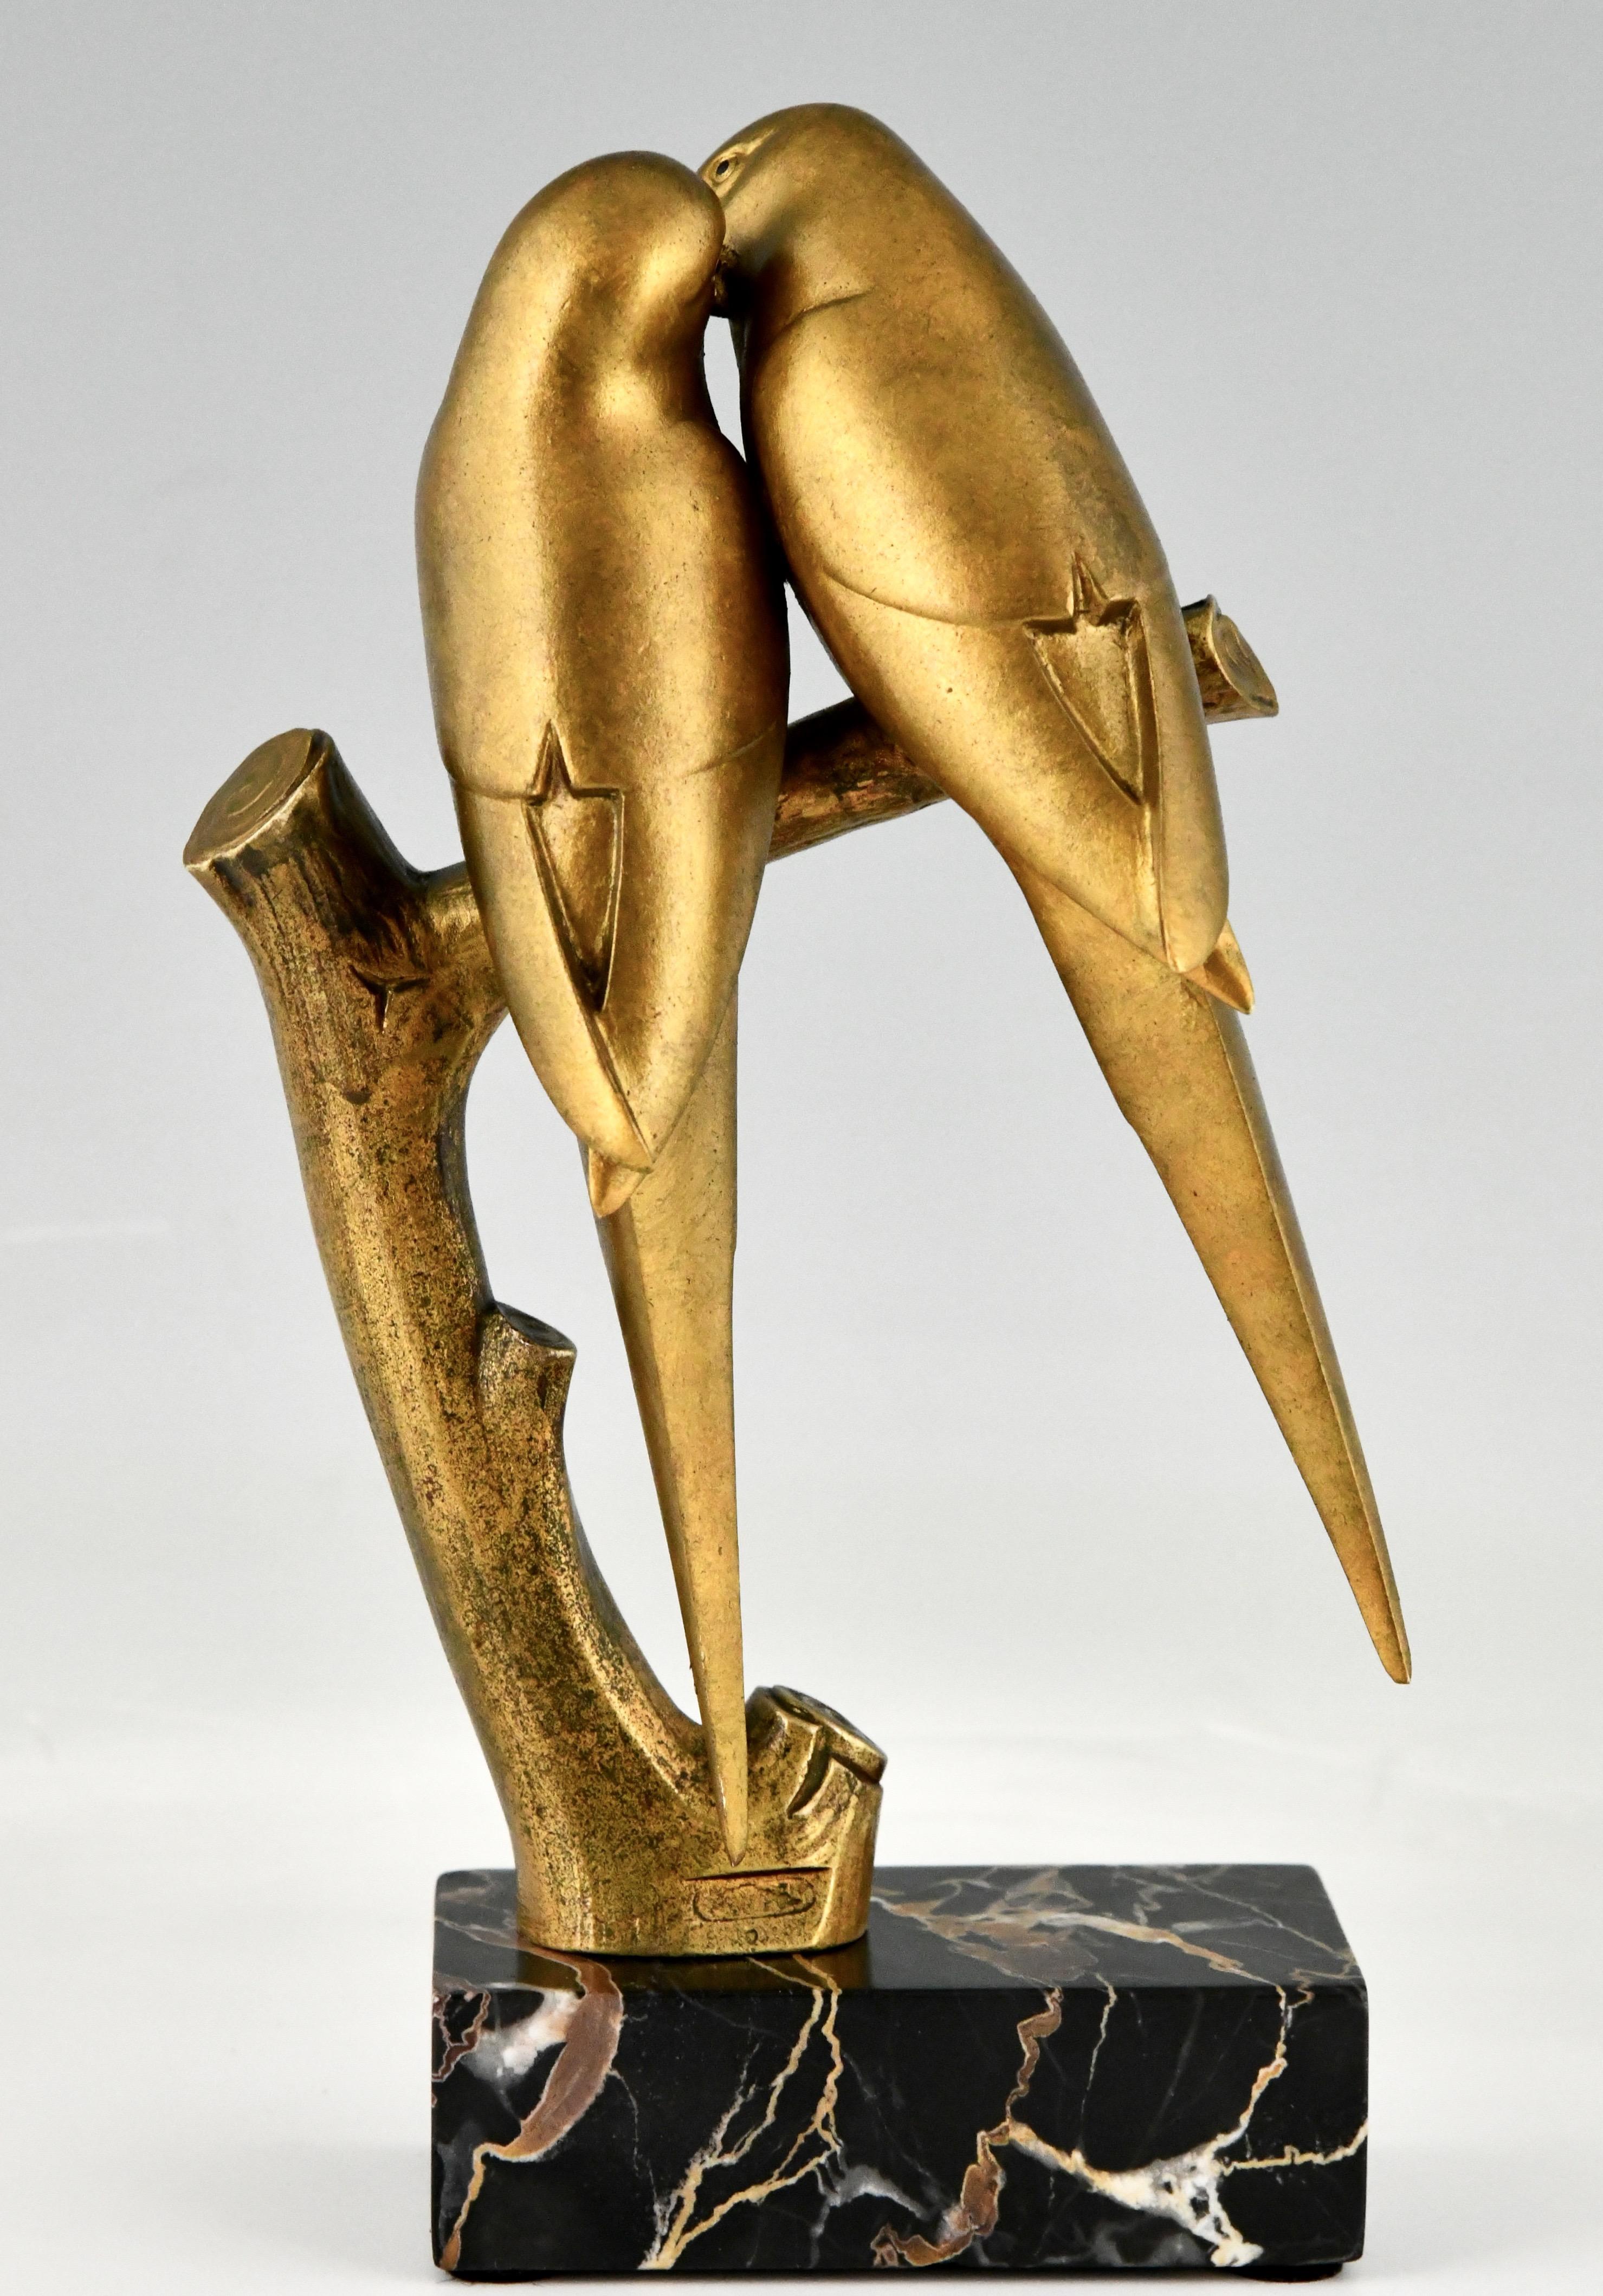 Marble French Art Deco Bronze Sculpture Lovebirds Parakeets by Paul Marec, France 1925